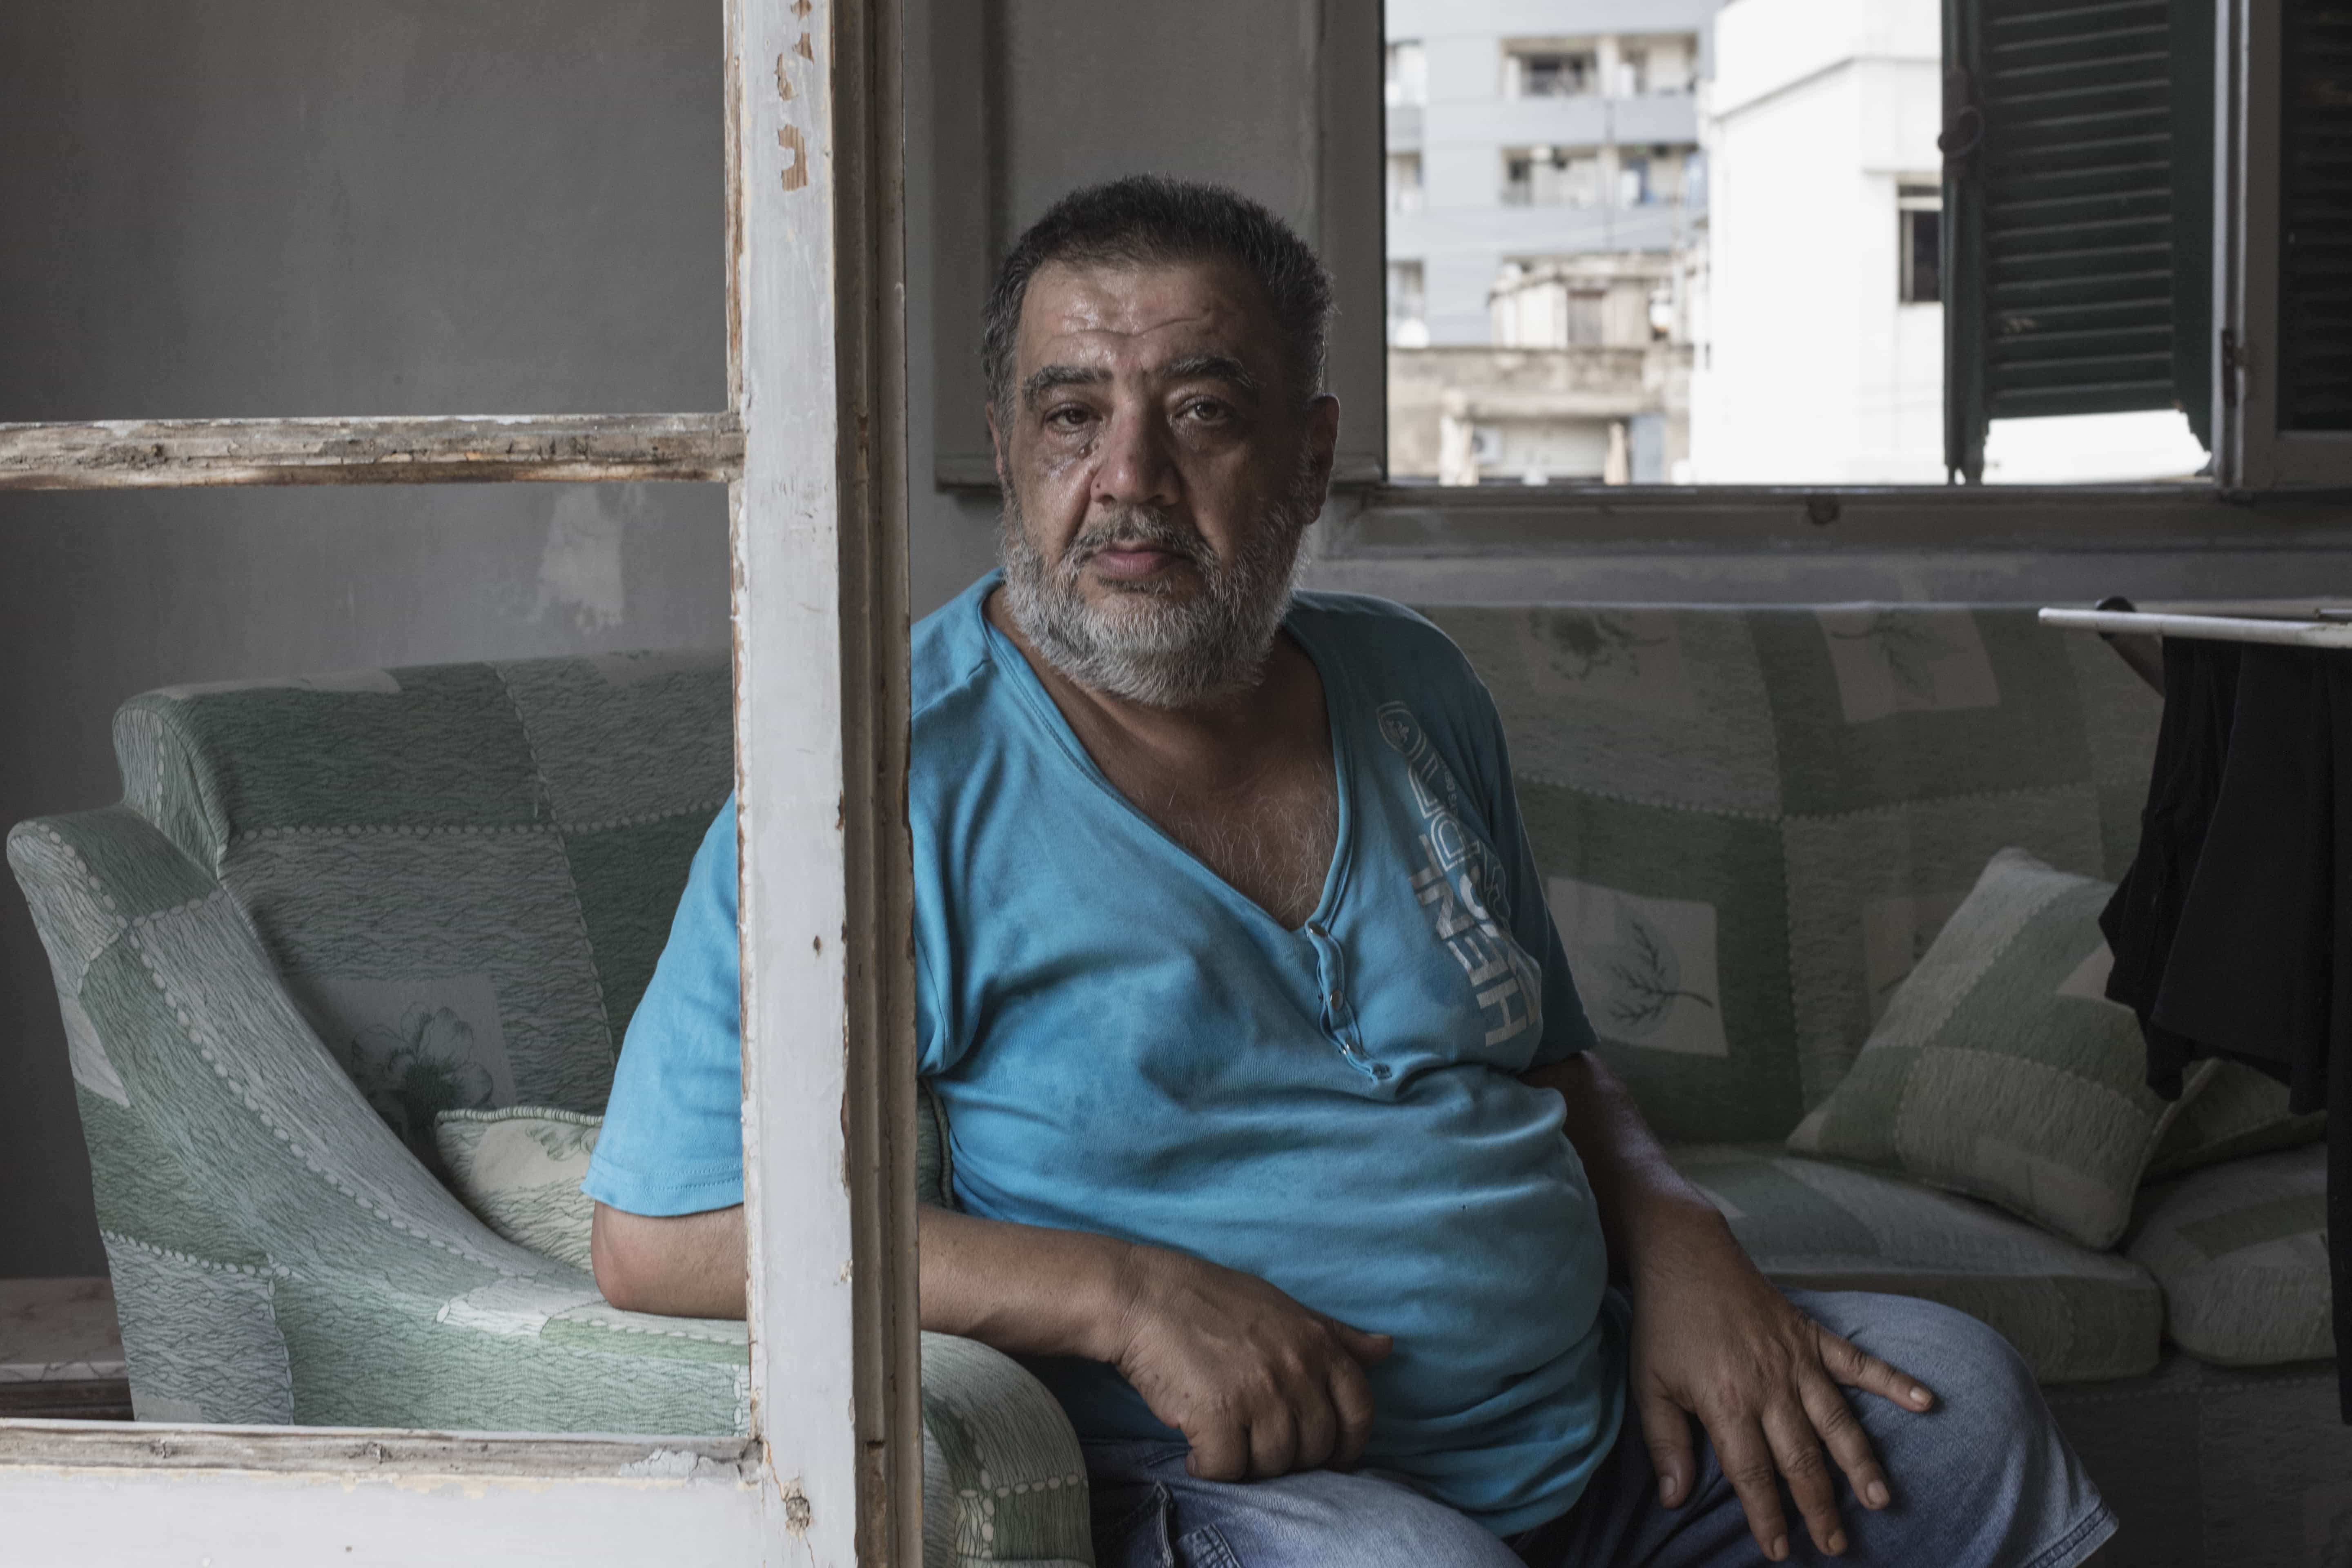 All wooden and glass furniture in Tony’s house were destroyed, including the smashed window behind him. We visited Tony and his family with our partners to assess the family’s psychosocial needs and what support we could offer.